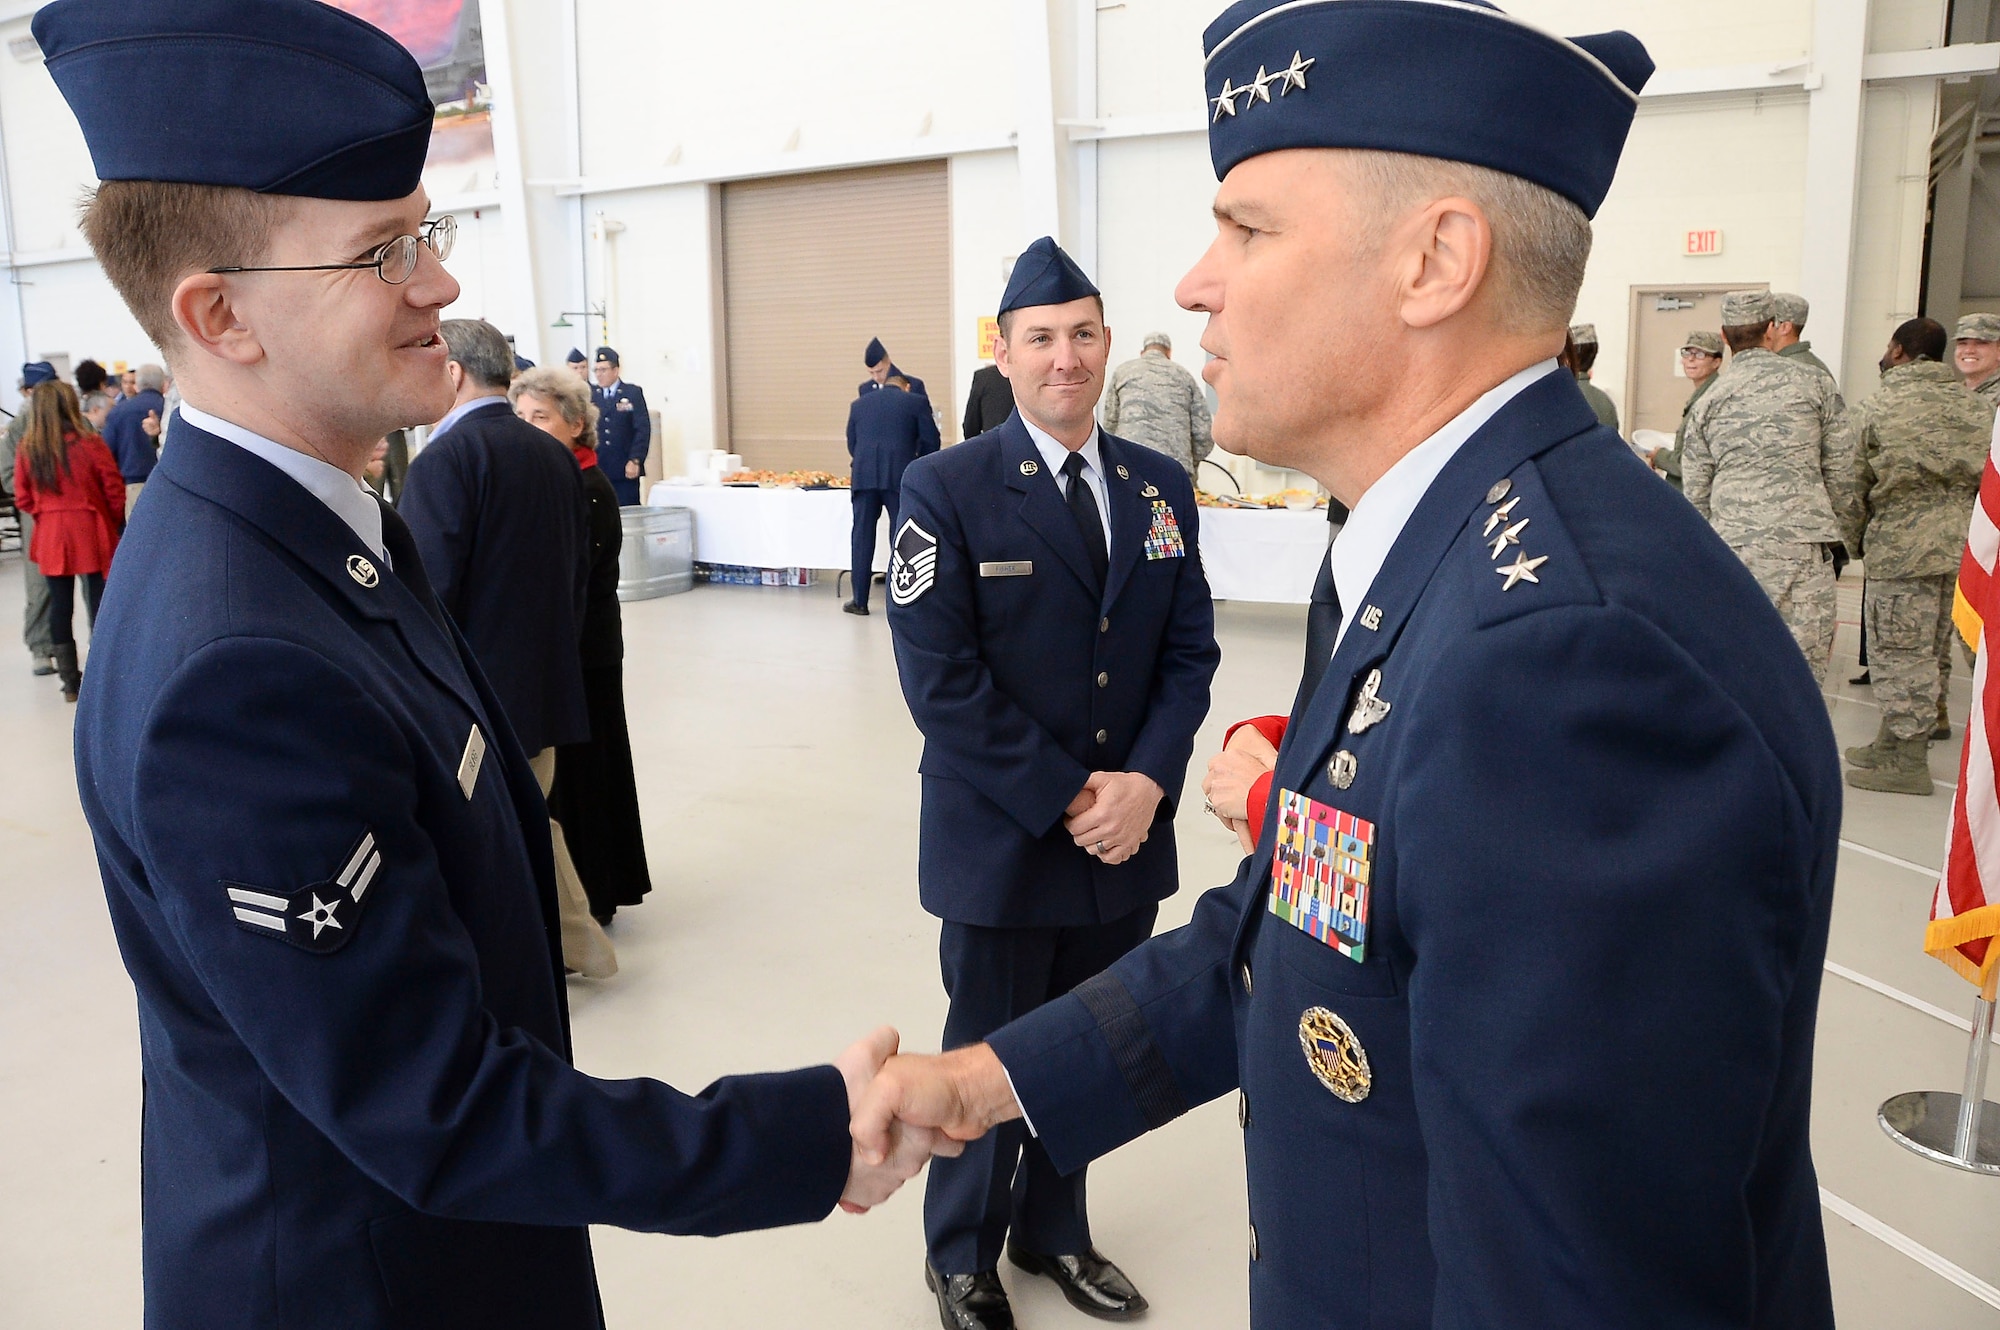 Lt. Gen. Chris Nowland, 12th Air Force (Air Forces Southern) commander, shakes hands with Airmen after assuming command of 12th Air Force (Air Forces Southern) at Davis-Monthan AFB, Ariz., Dec. 19, 2014. Nowland comes to Tucson from his previous assignment as the Chief of Staff, Headquarters United States Southern Command, where he was responsible for successfully integrating and synchronizing the efforts of nine directorates and 16 special staff offices in support of the Combatant Commander's Theater Campaign Plan. (U.S. Air Force photo by Staff Sgt. Adam Grant/Released)